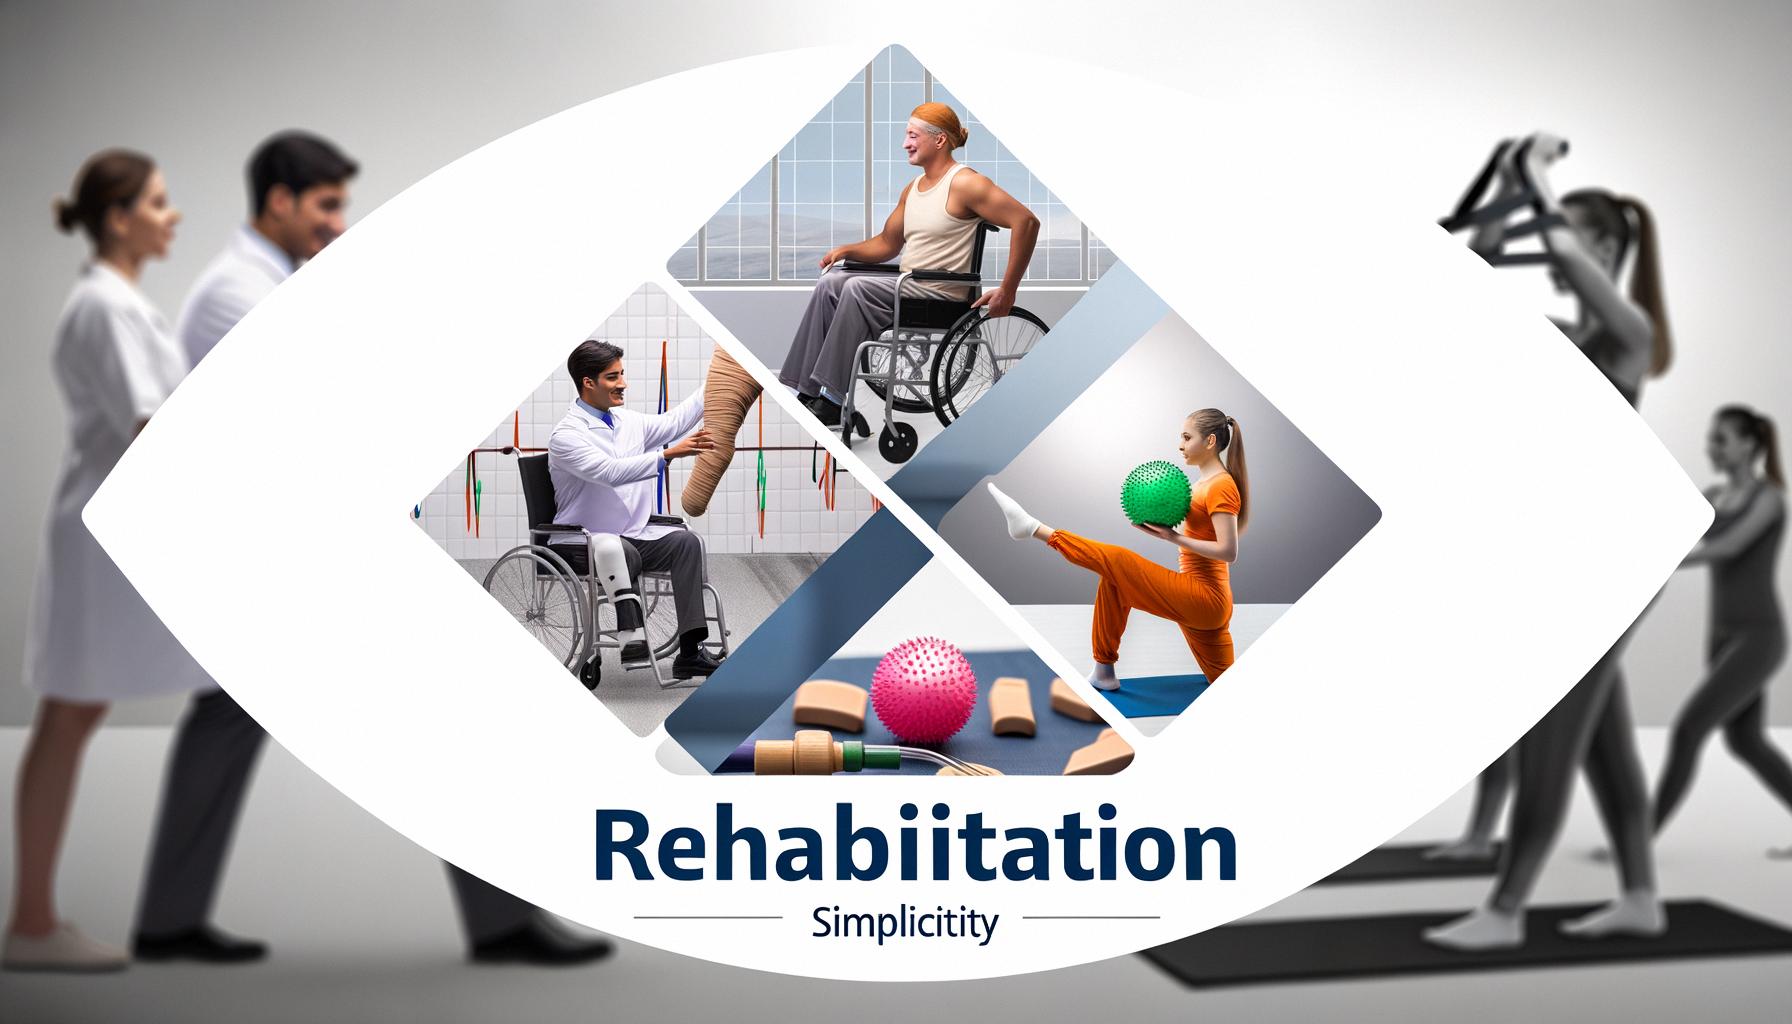 Rehabilitation significantly reduces health risks, enhances quality of life across conditions.